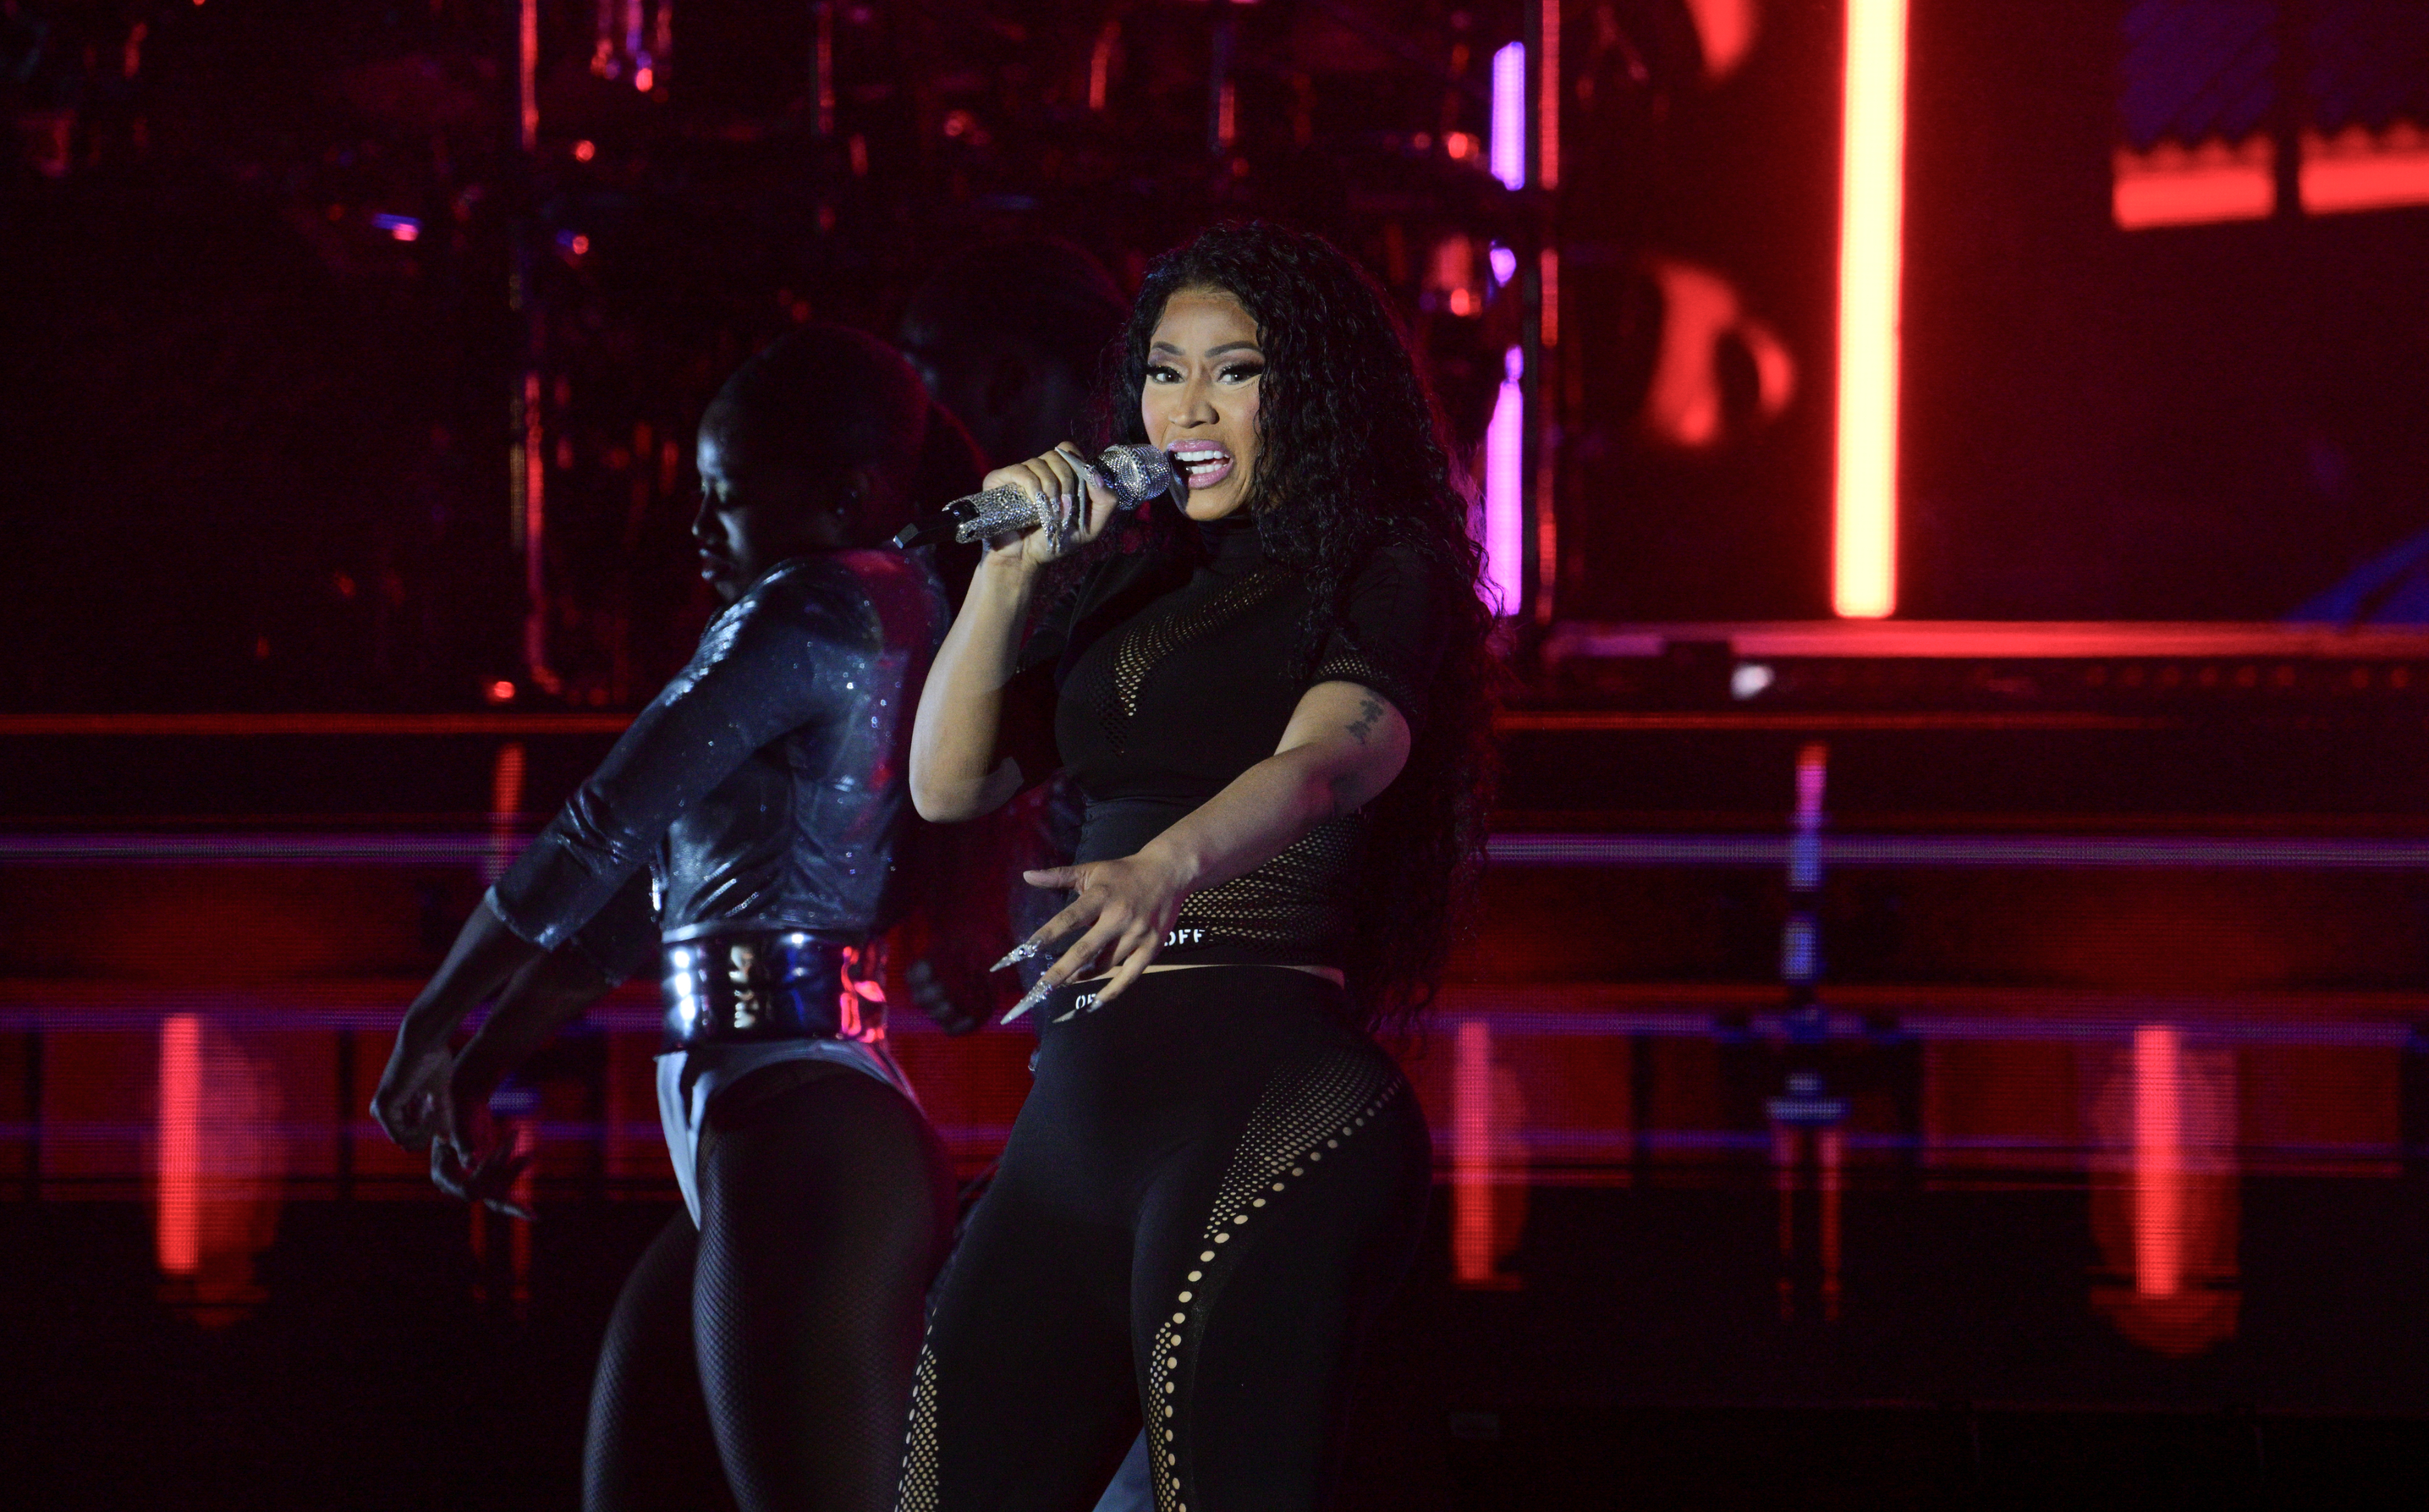 Nicki Minaj performs on stage in a black outfit with a dancer behind her